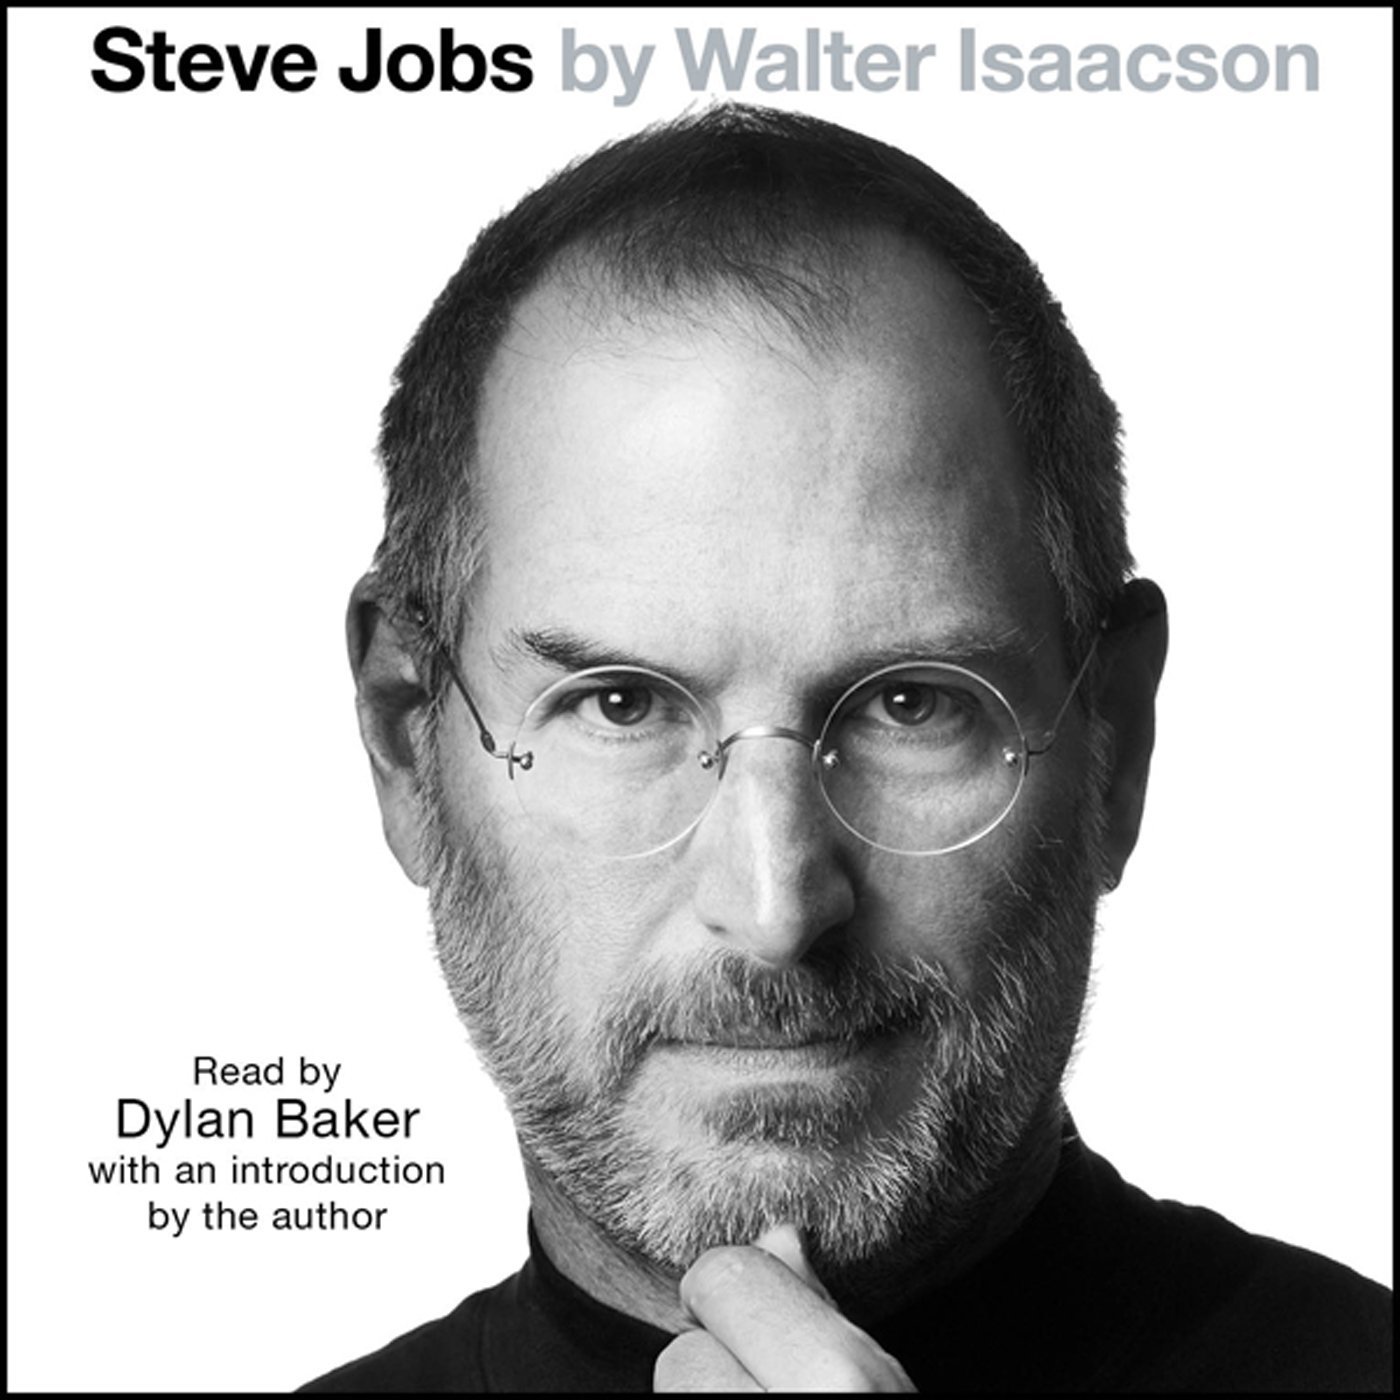 Honest Review of Steve Jobs by Walter Isaacson